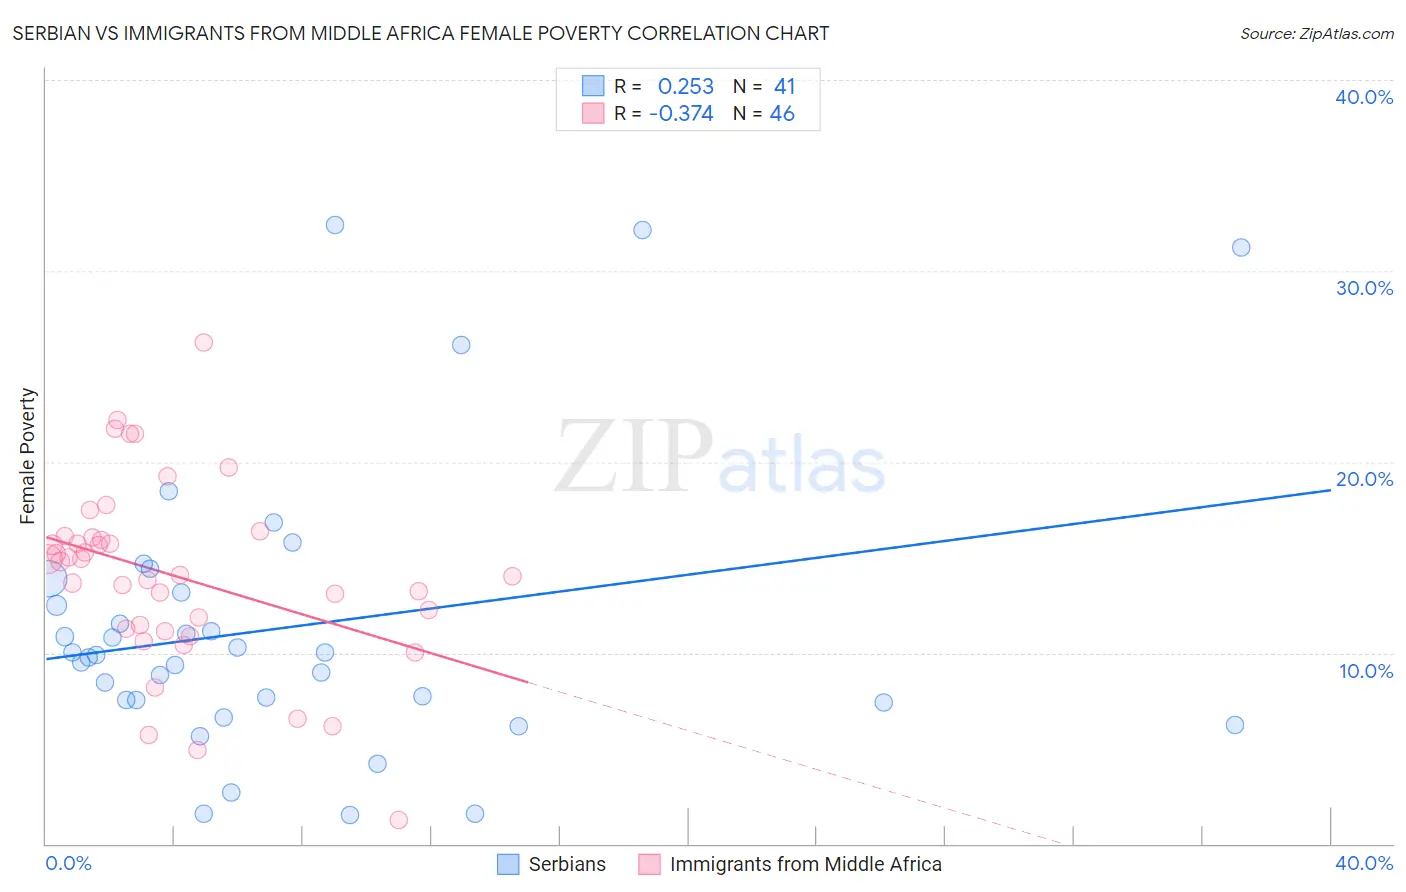 Serbian vs Immigrants from Middle Africa Female Poverty